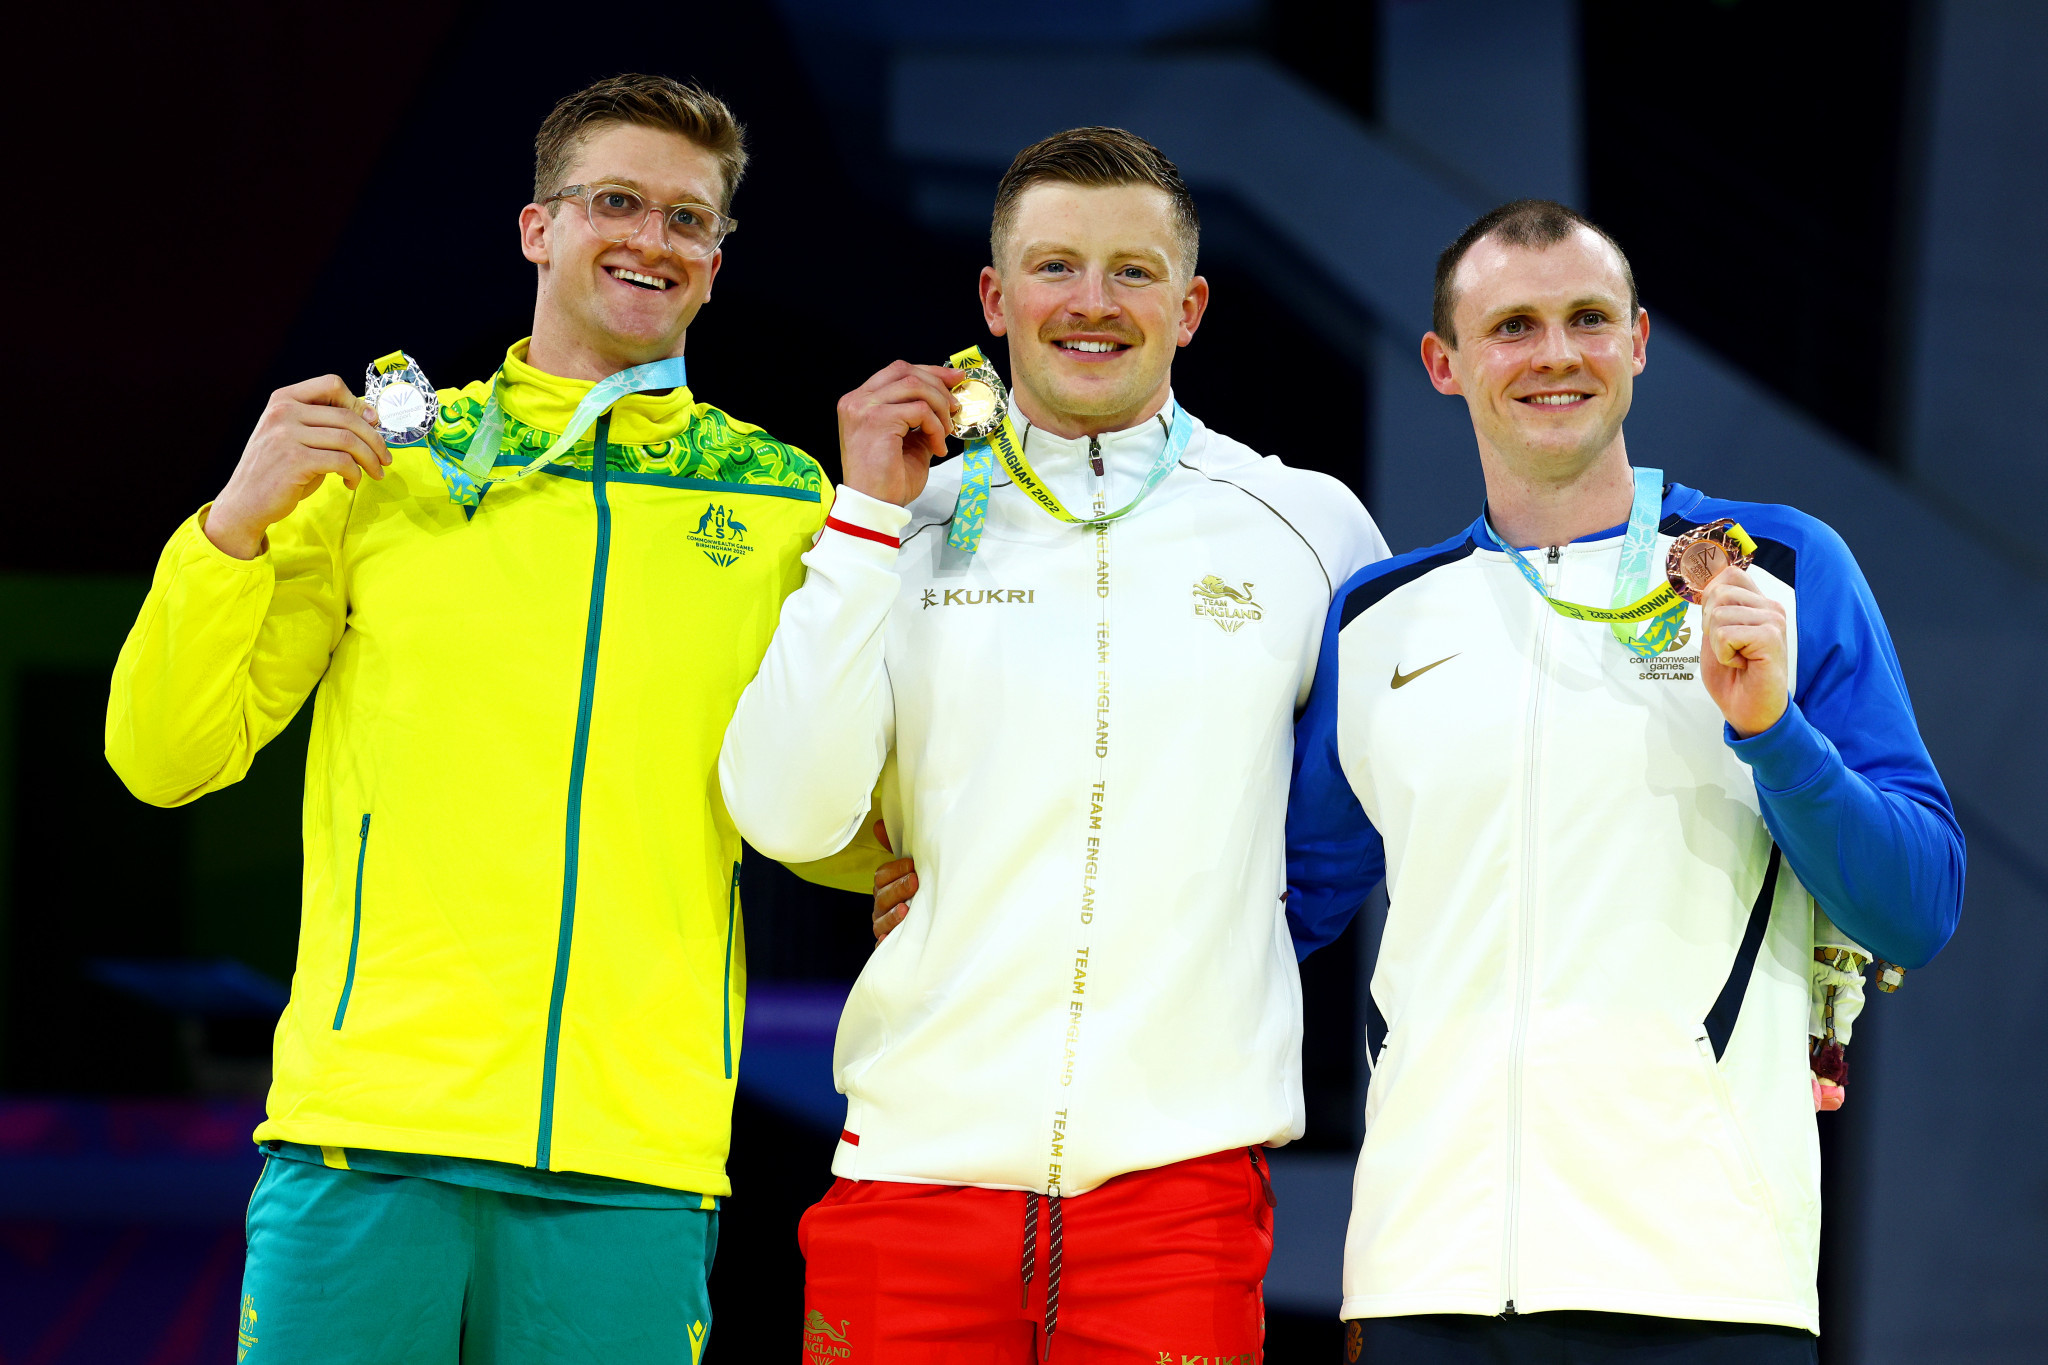 Sam Williamson (L) has issued a warning to Adam Peaty (C) as their rivalry heats up before Paris 2024. GETTY IMAGES